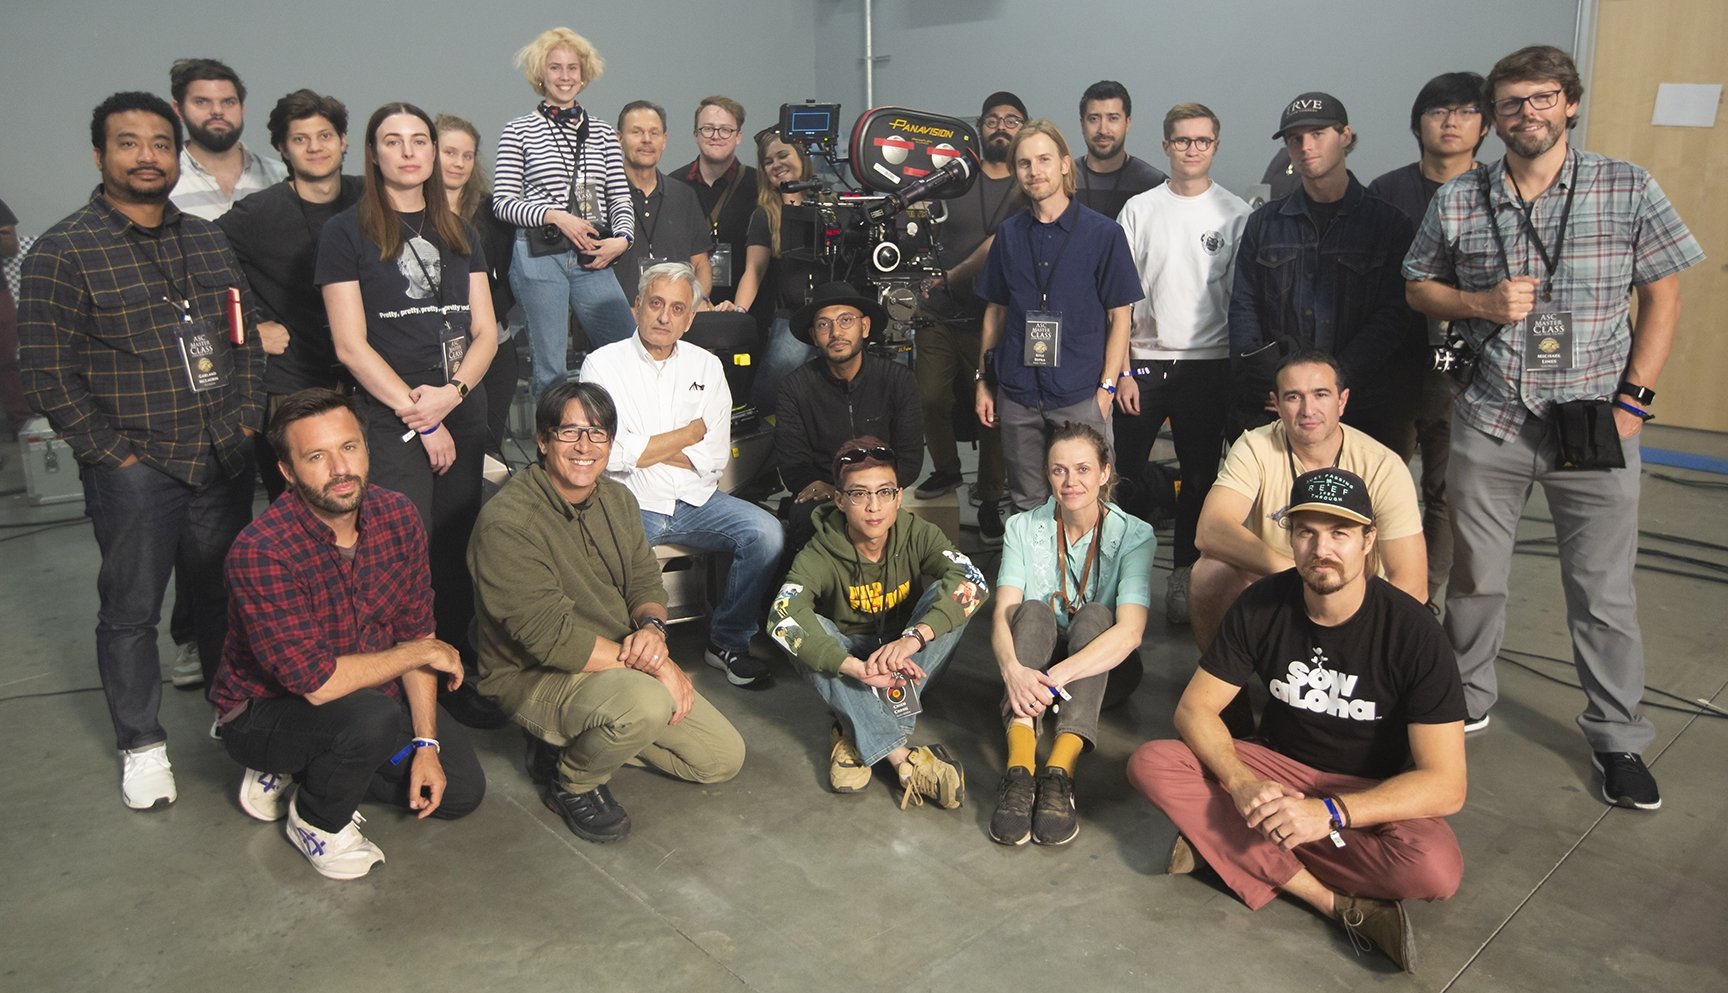 Master Class - The American Society of Cinematographers (en-US)